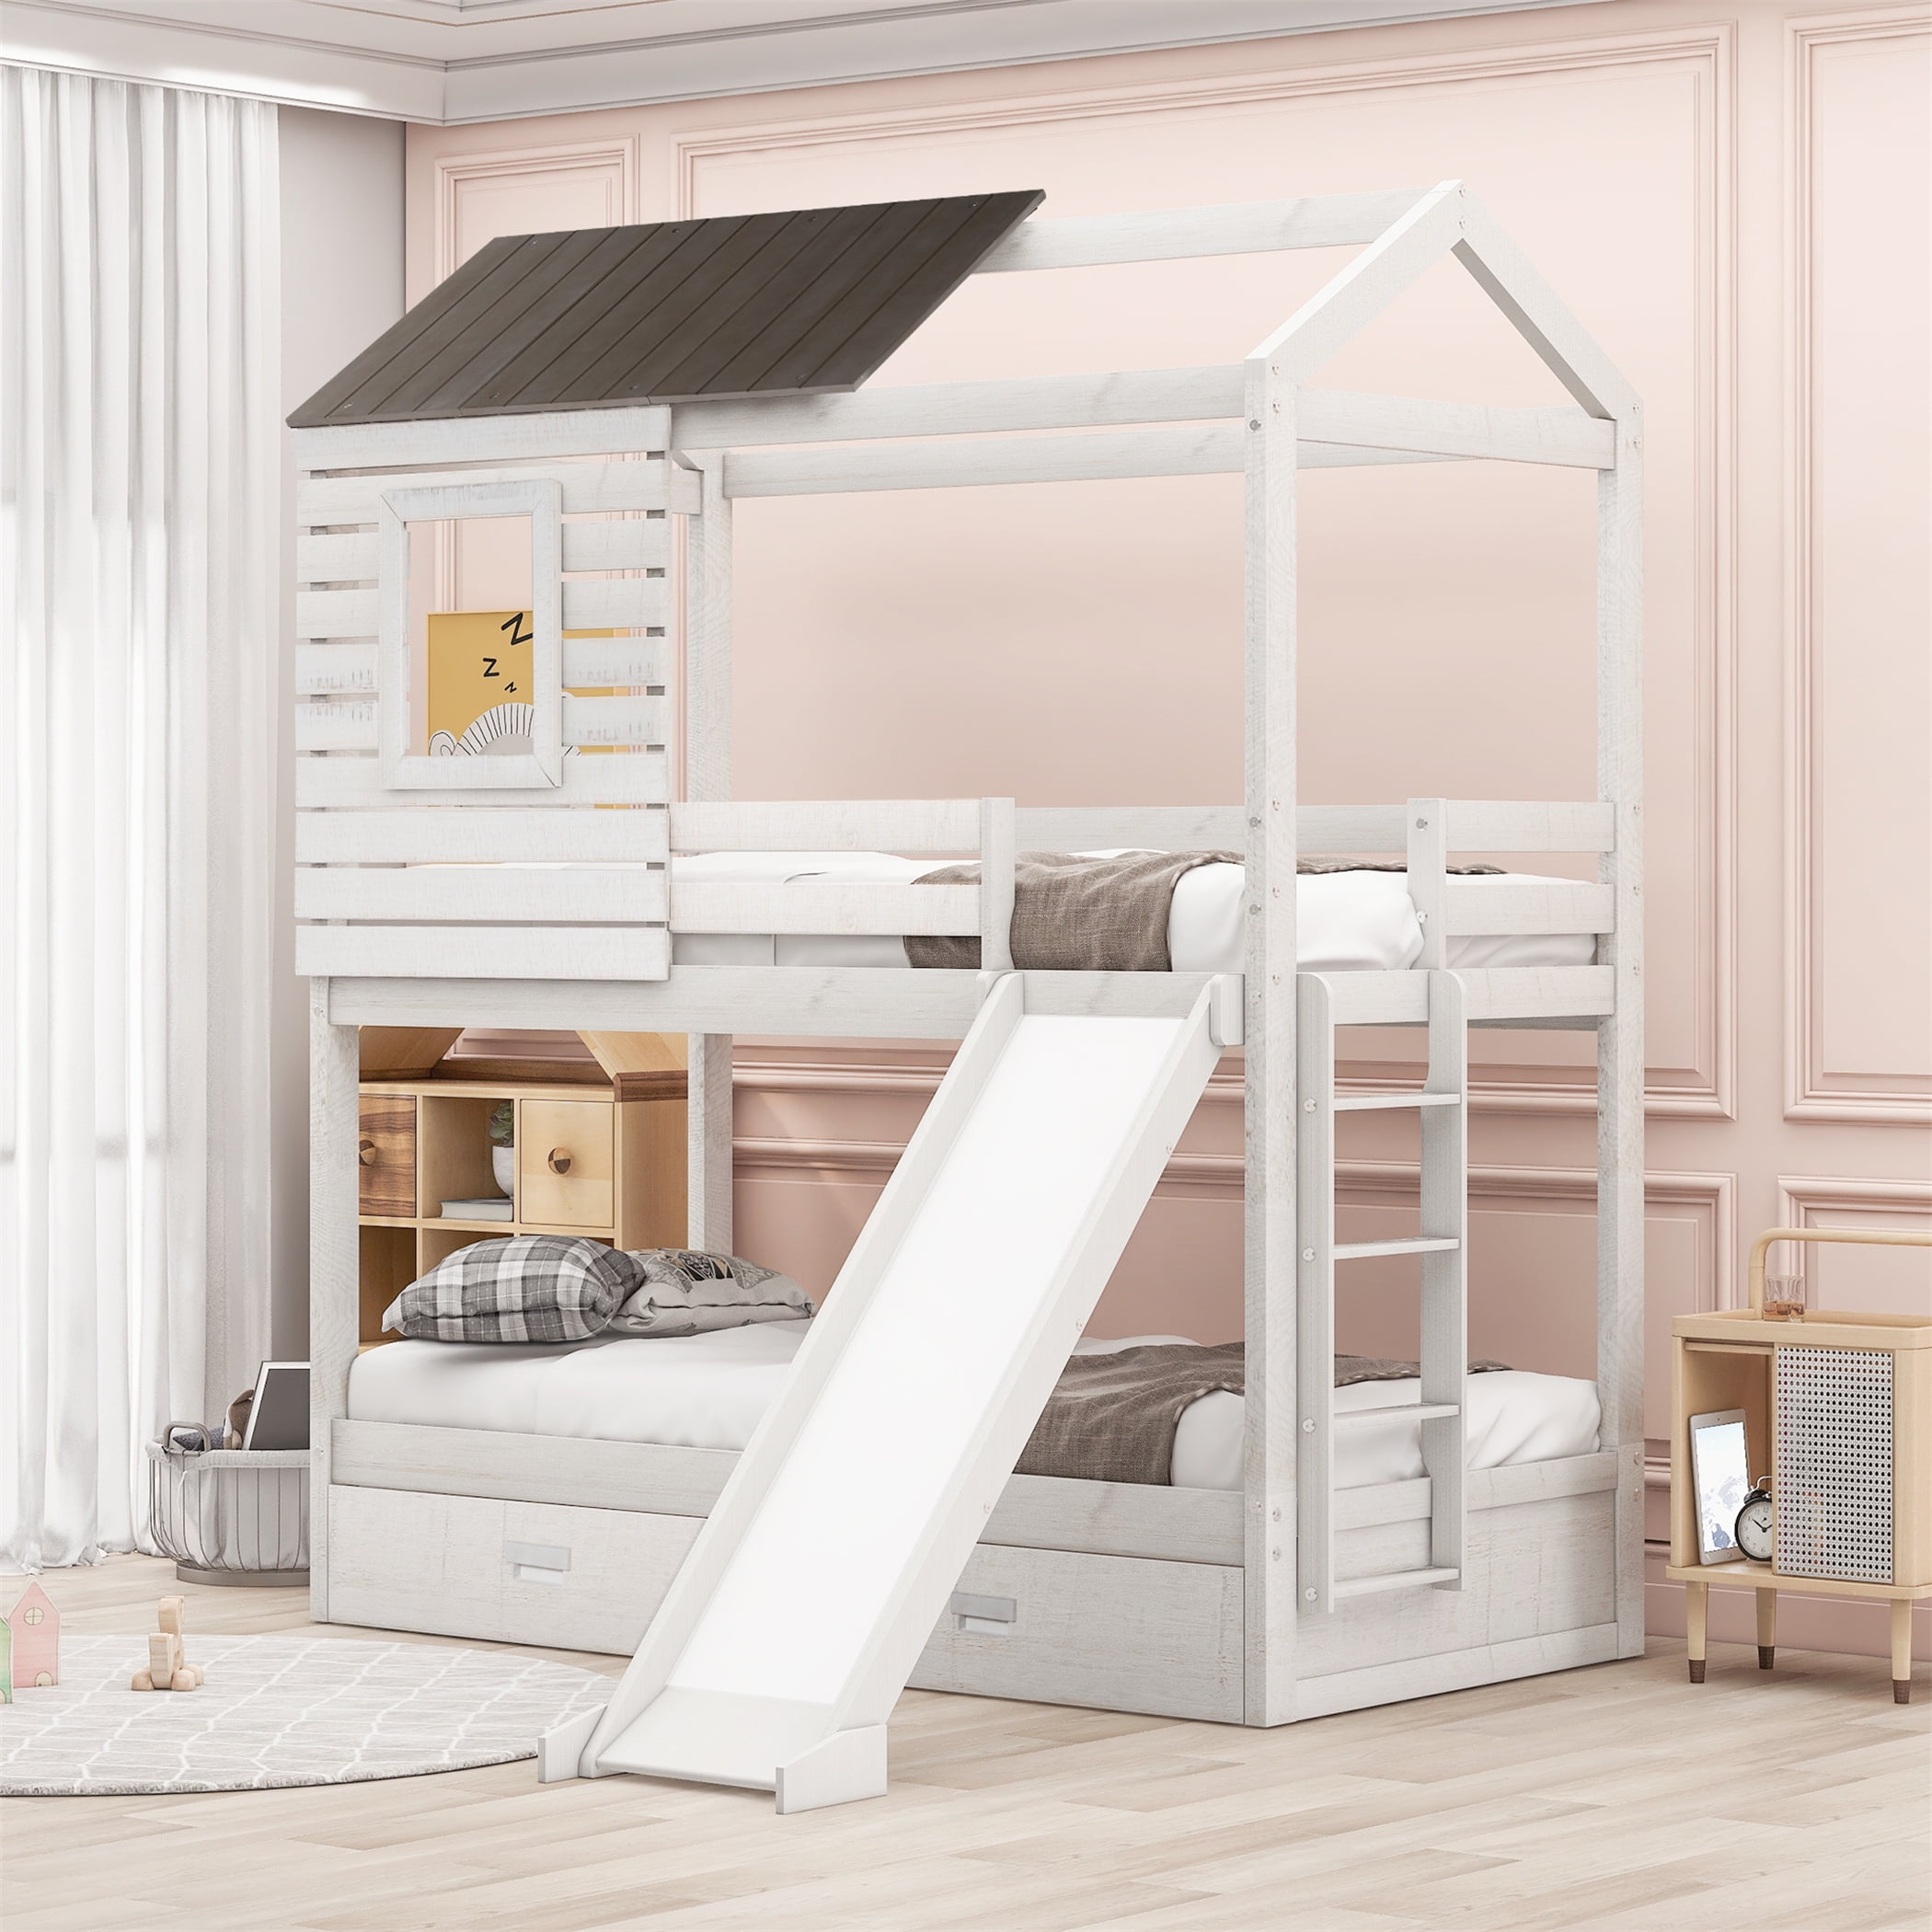 Ladder Twin Over Bunk Beds, Can You Add A Slide To Bunk Bed